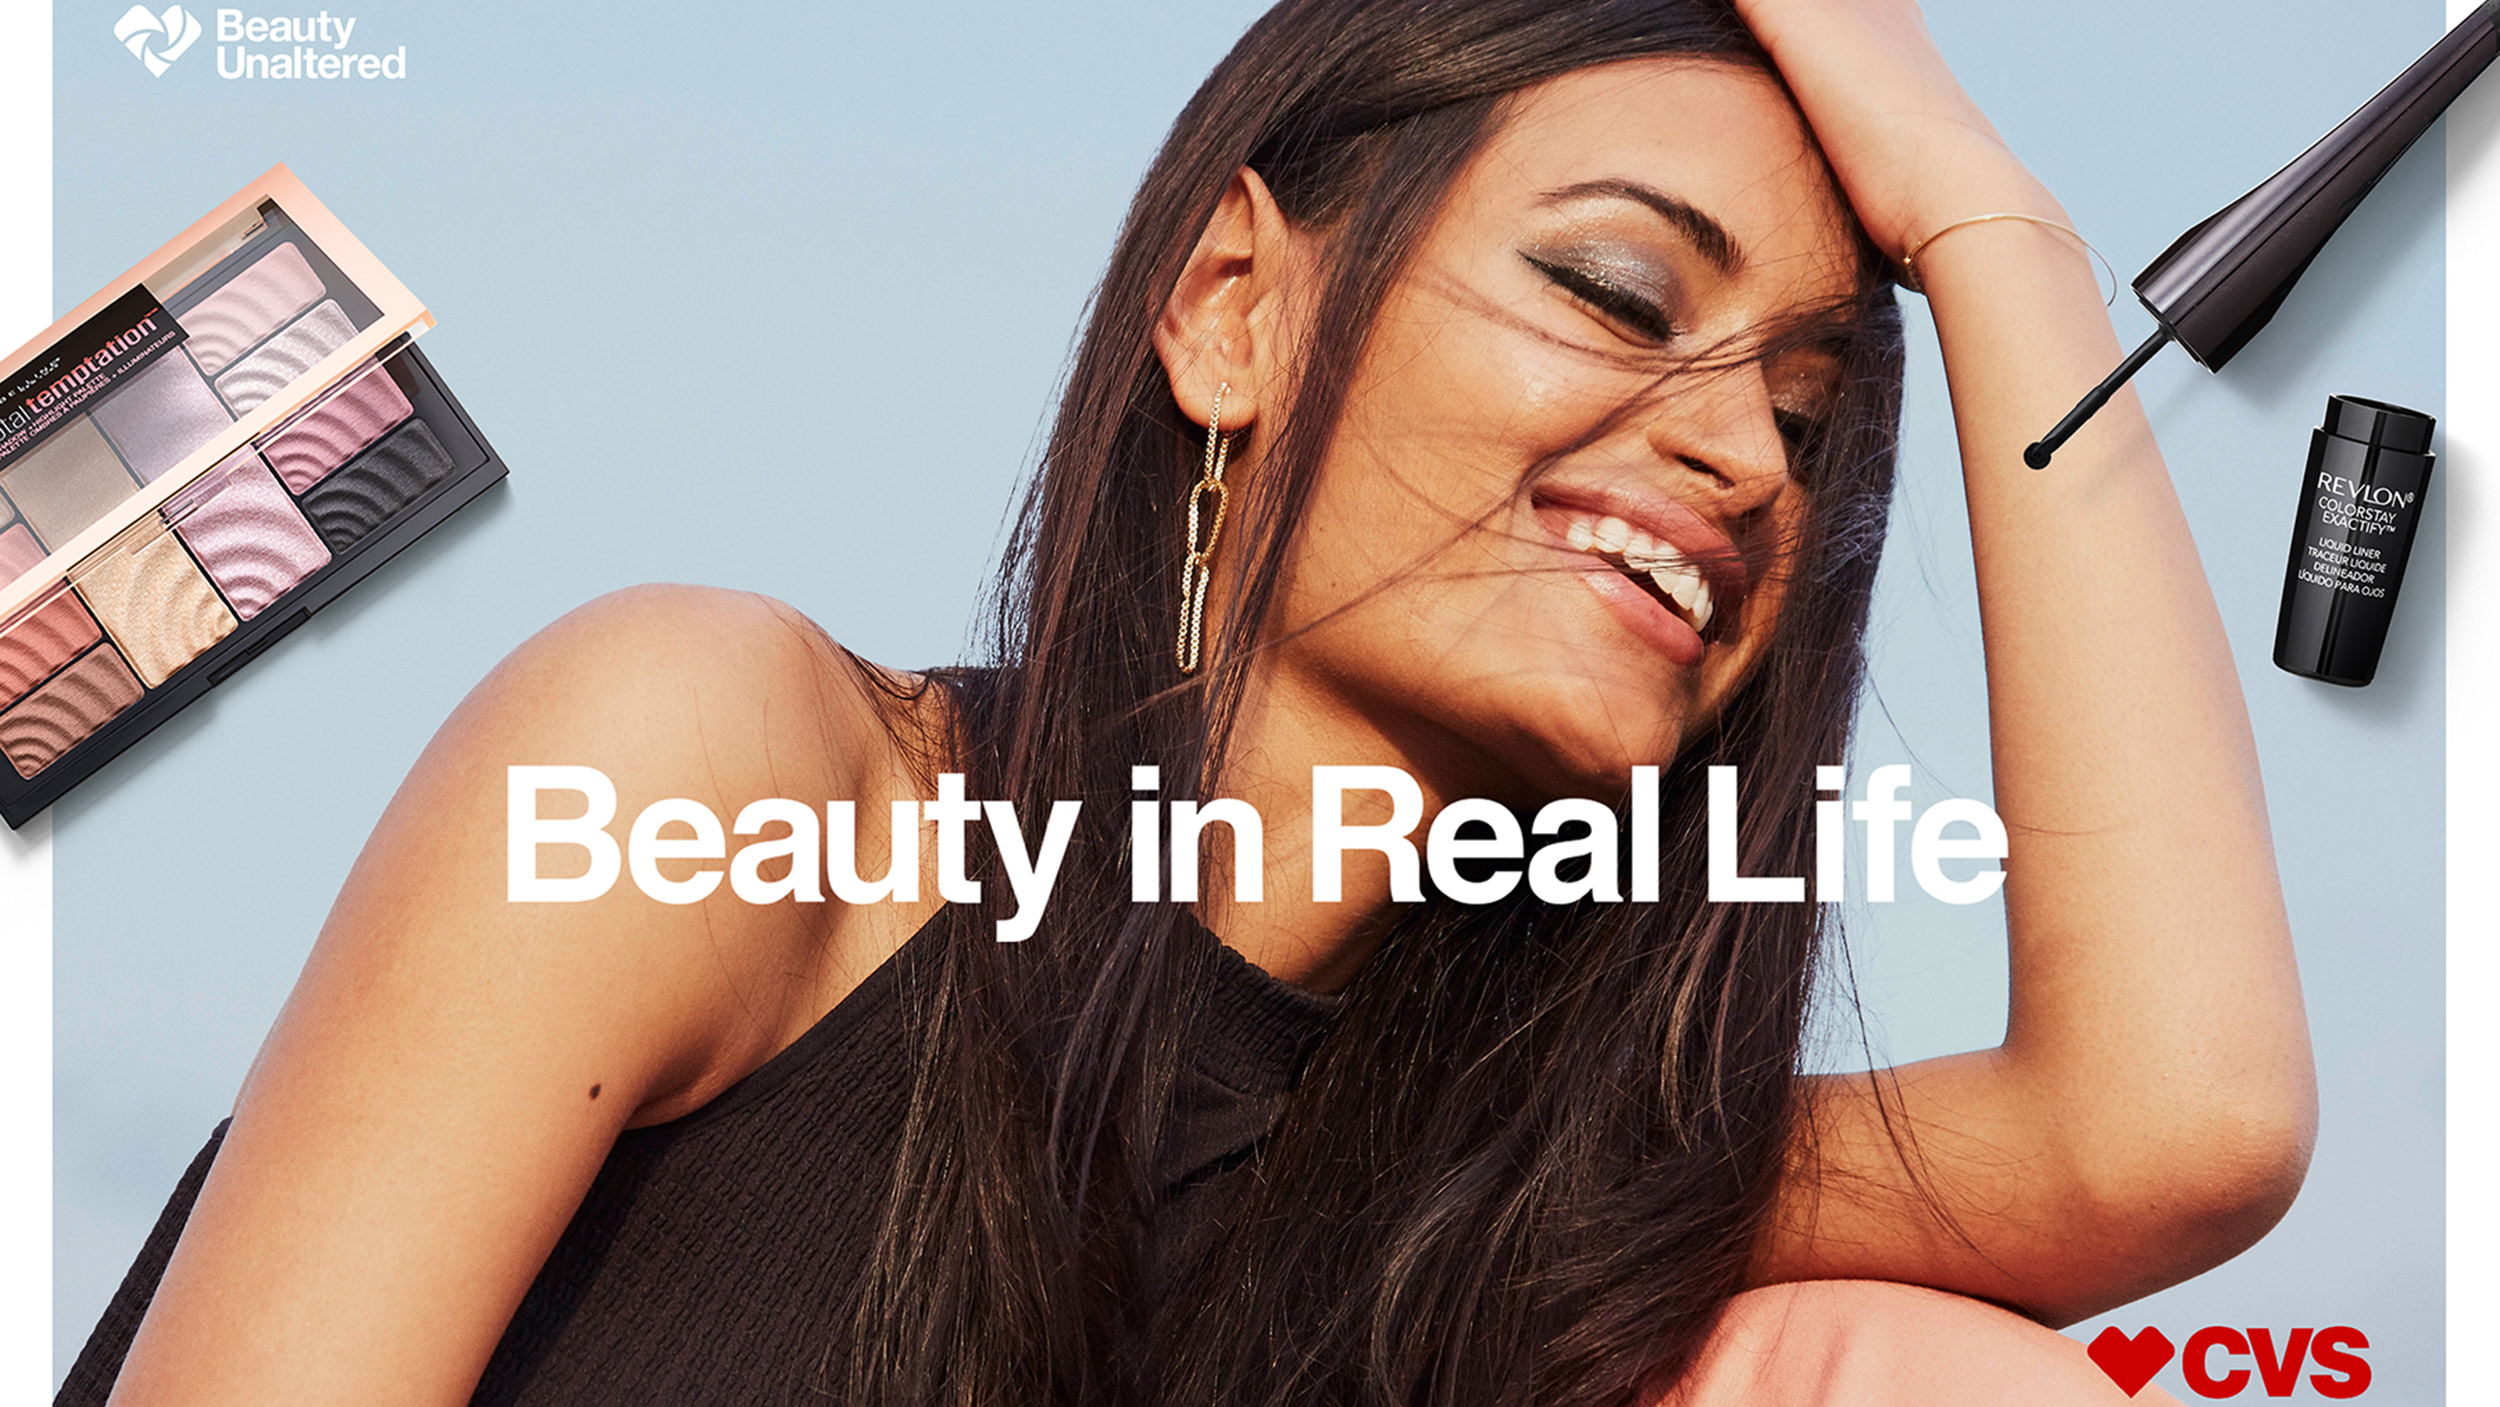 CVS launches 'Beauty in Real Life' campaign, unaltered pics - TODAY.com